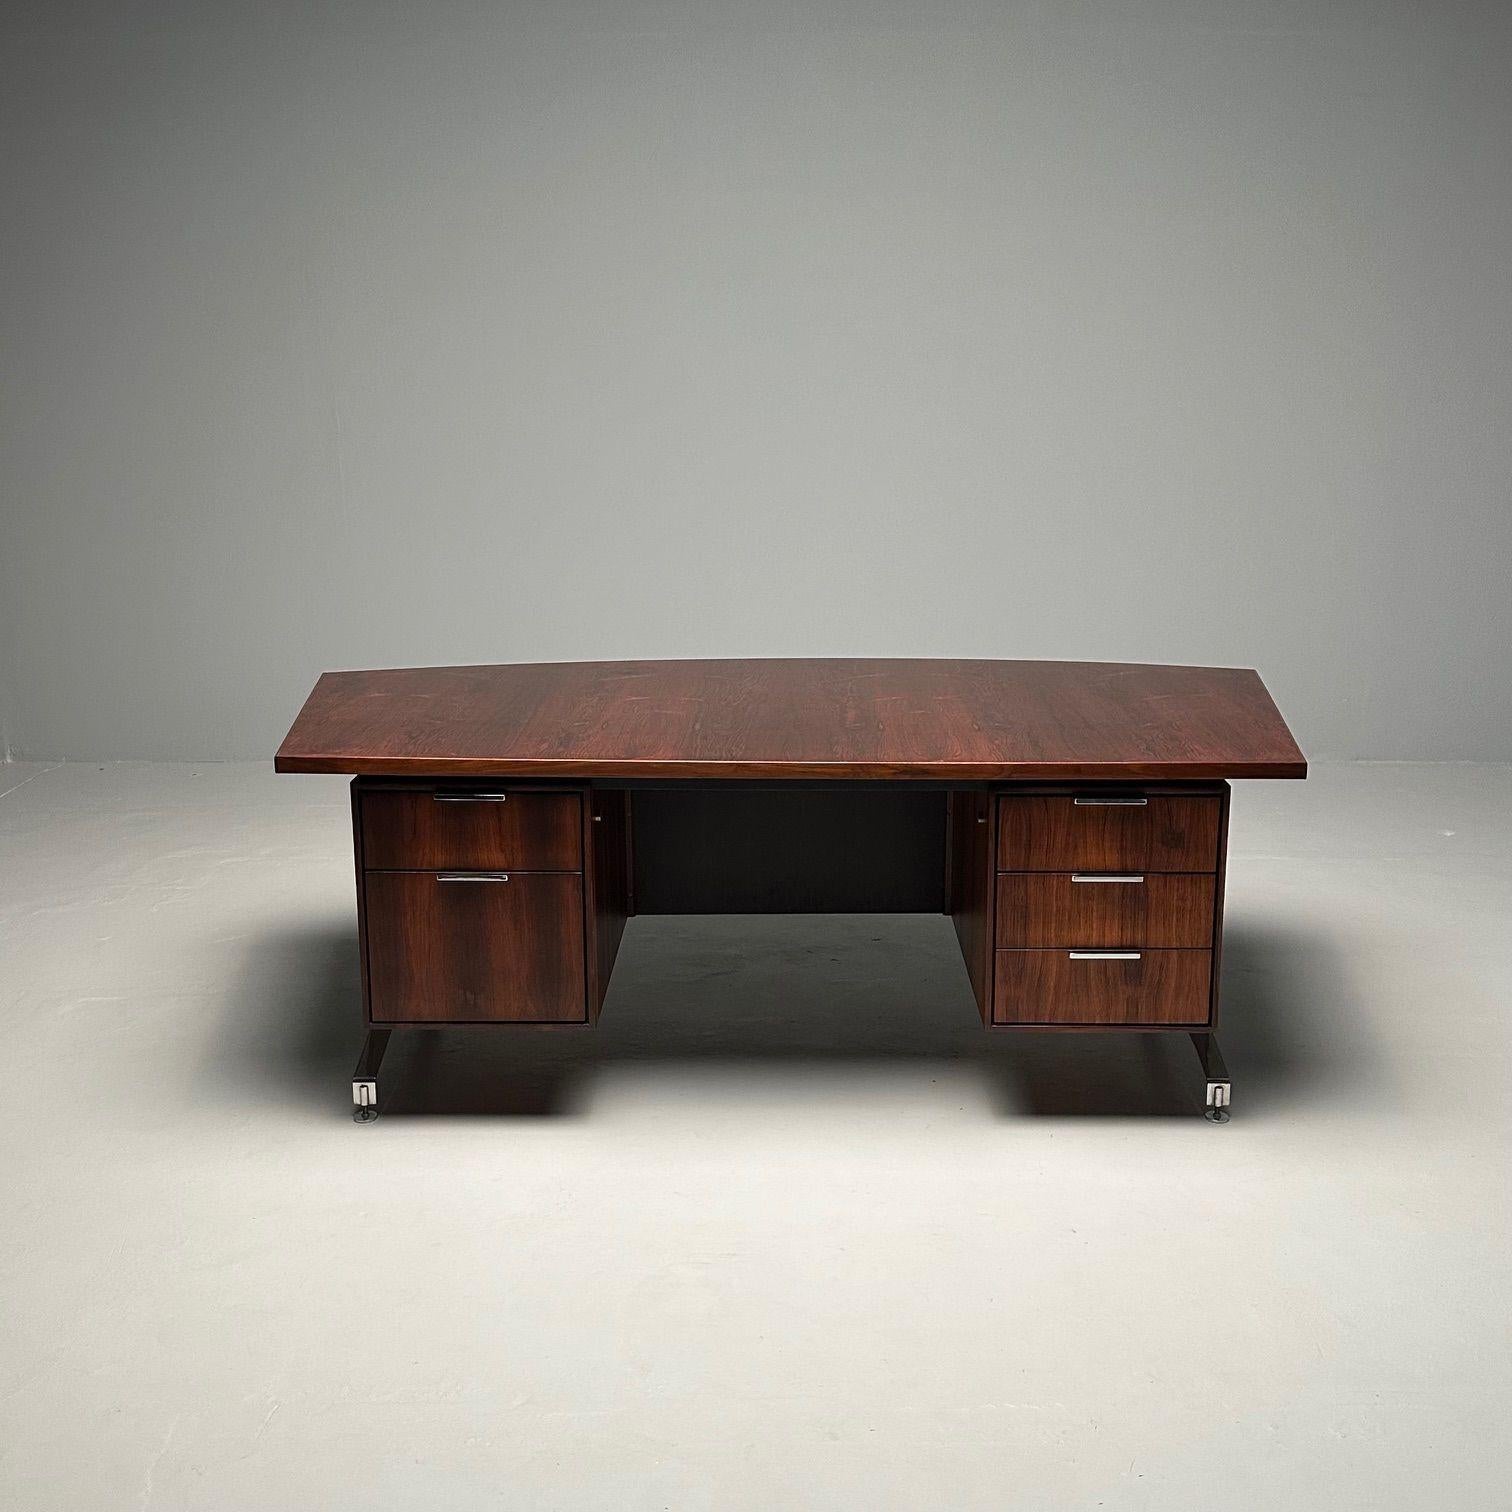 Mid-Century Modern George Nelson Style Partners / Executive Desk, Rosewood/Walnut Fully Refinished. 
 
Fully refinshed American designer partners desk in a gorgeous walnut or rosewood with steel accents. This palatial desk has three drawers on the